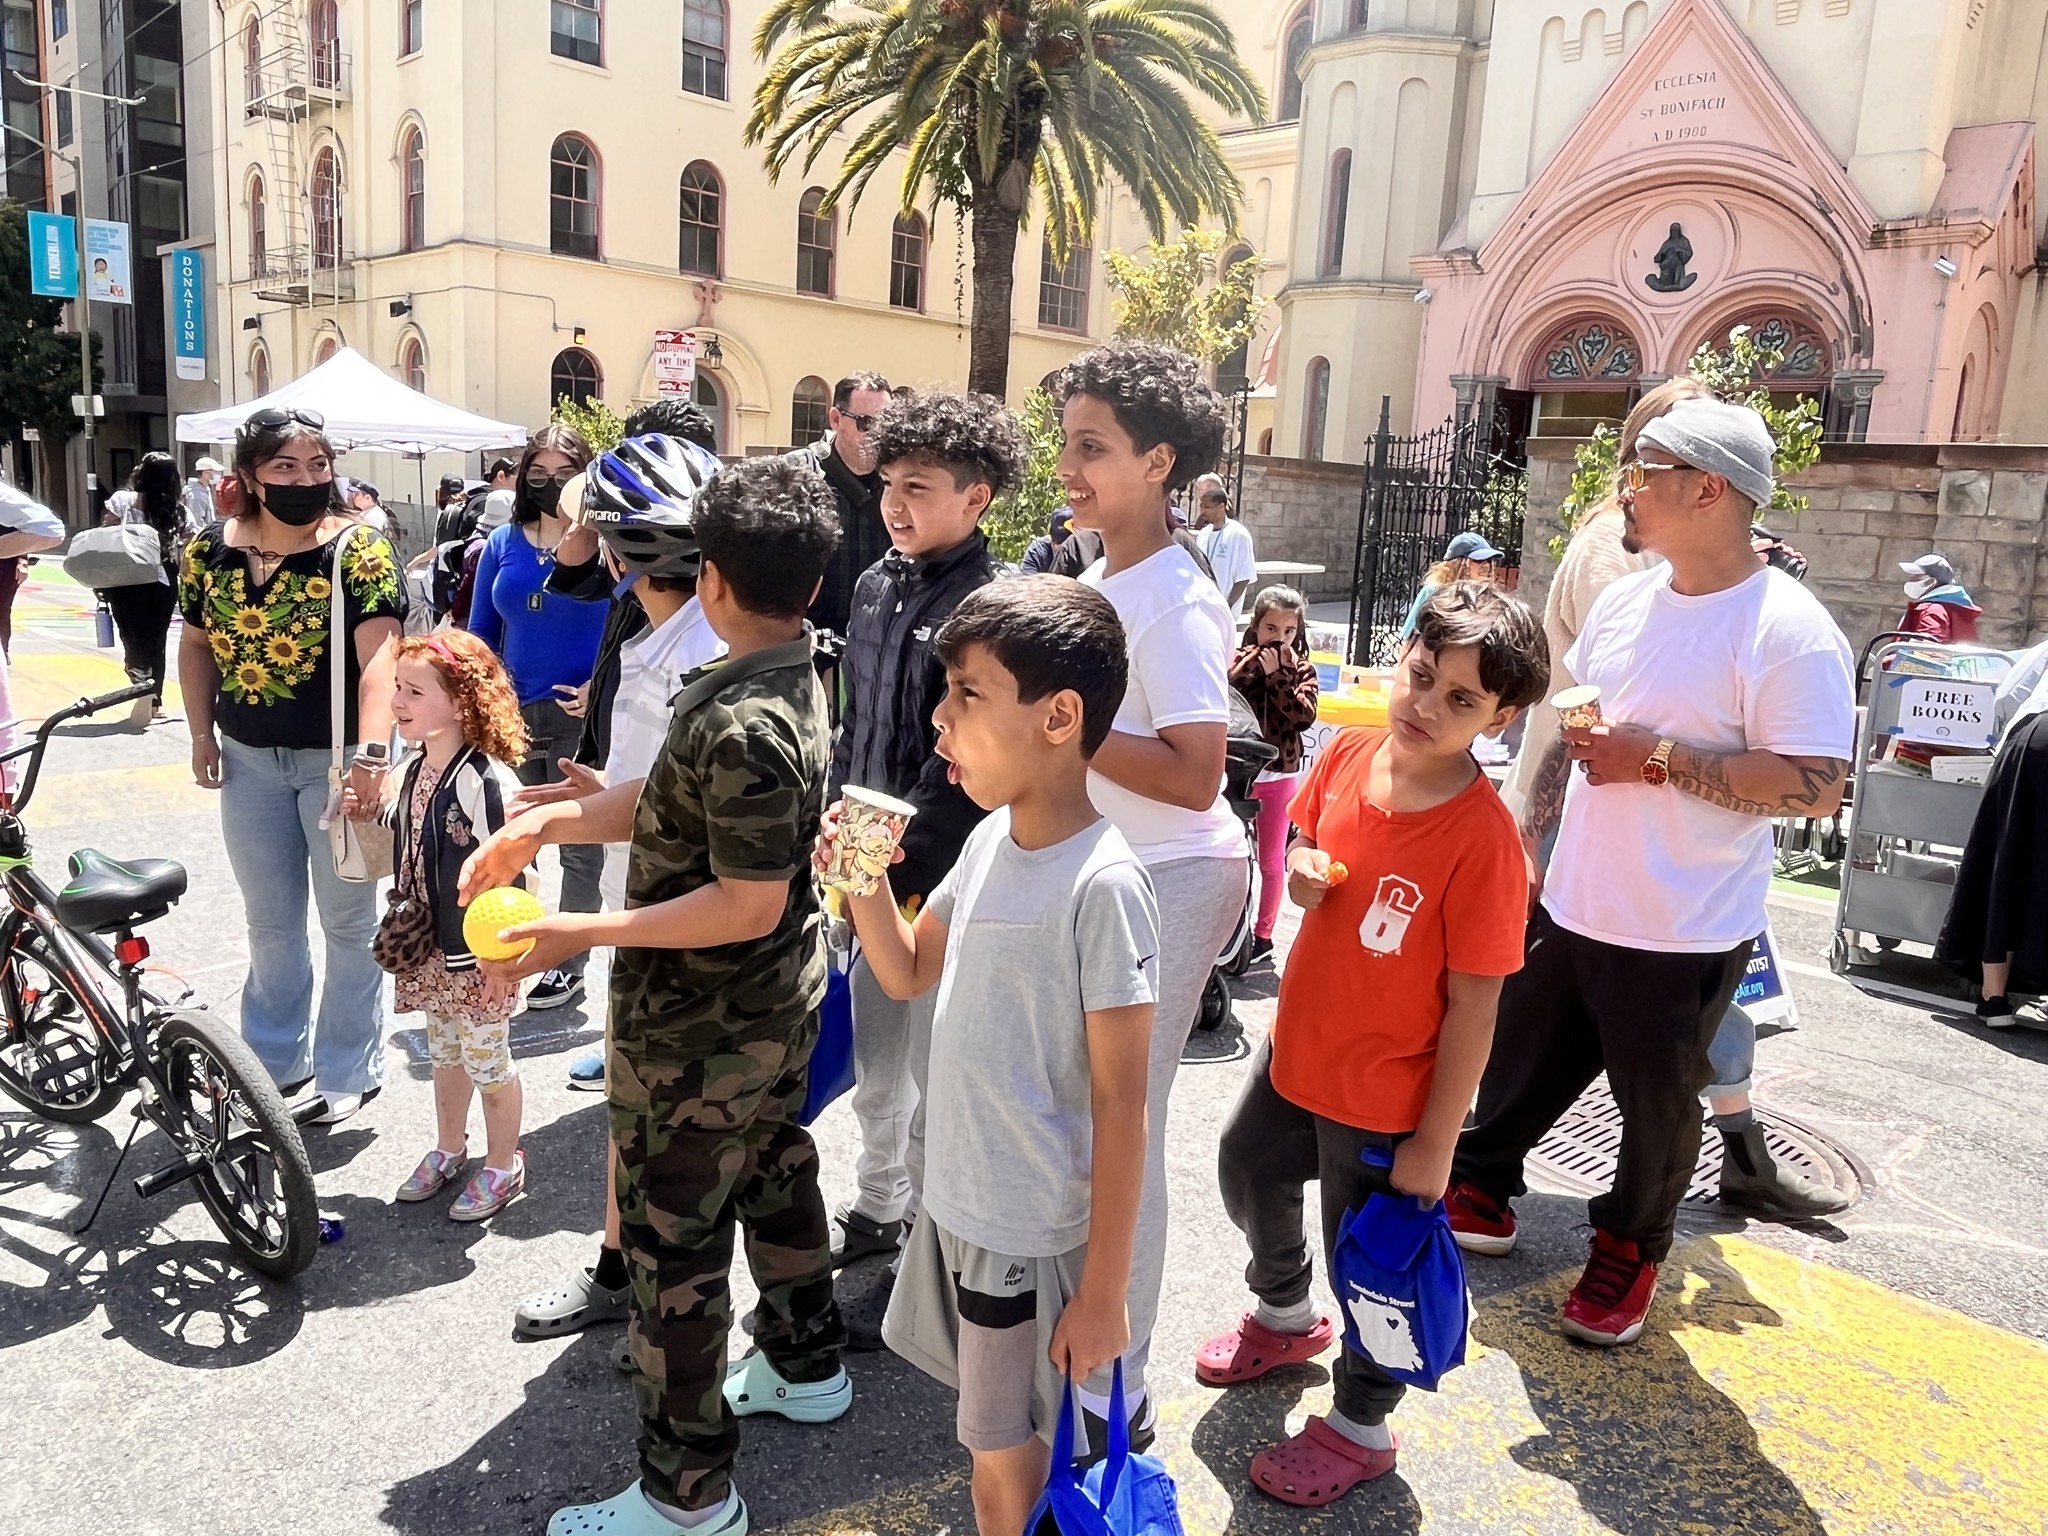 St. Anthony Foundation with Livable City Kicks Off the Summer Season with Sunday Streets Tenderloin on June 23